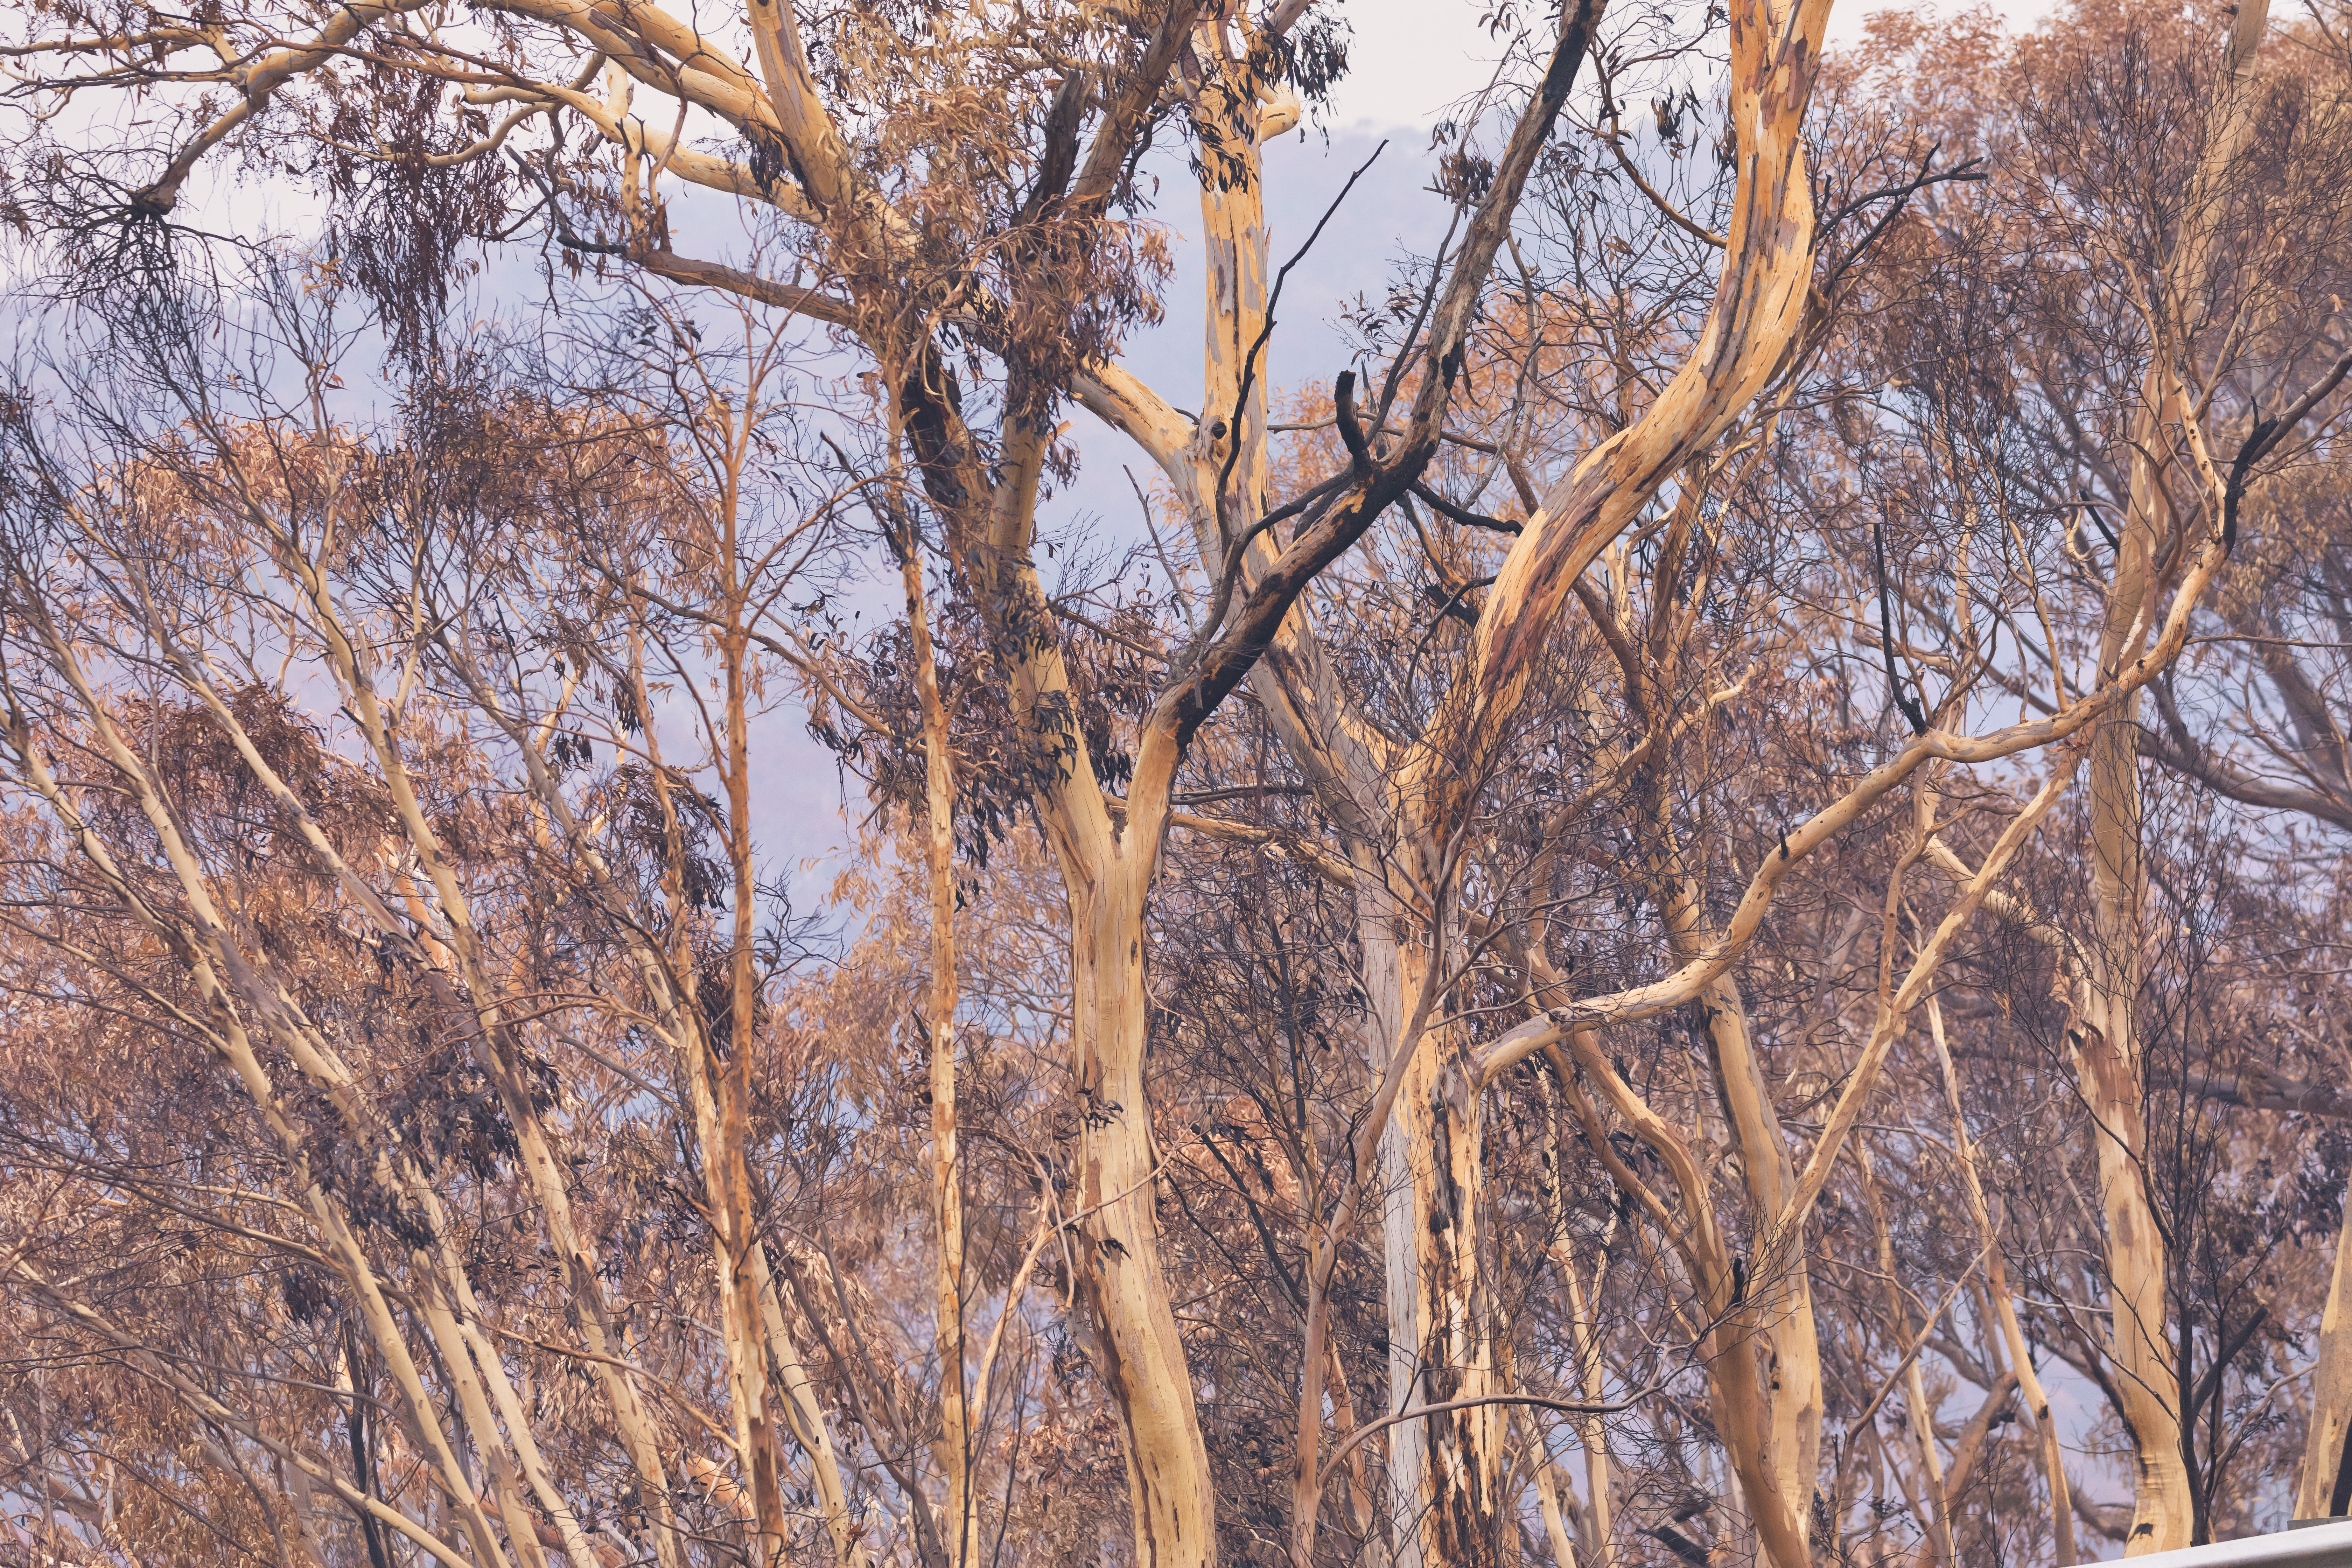 Gum Trees damaged by the bushfires 